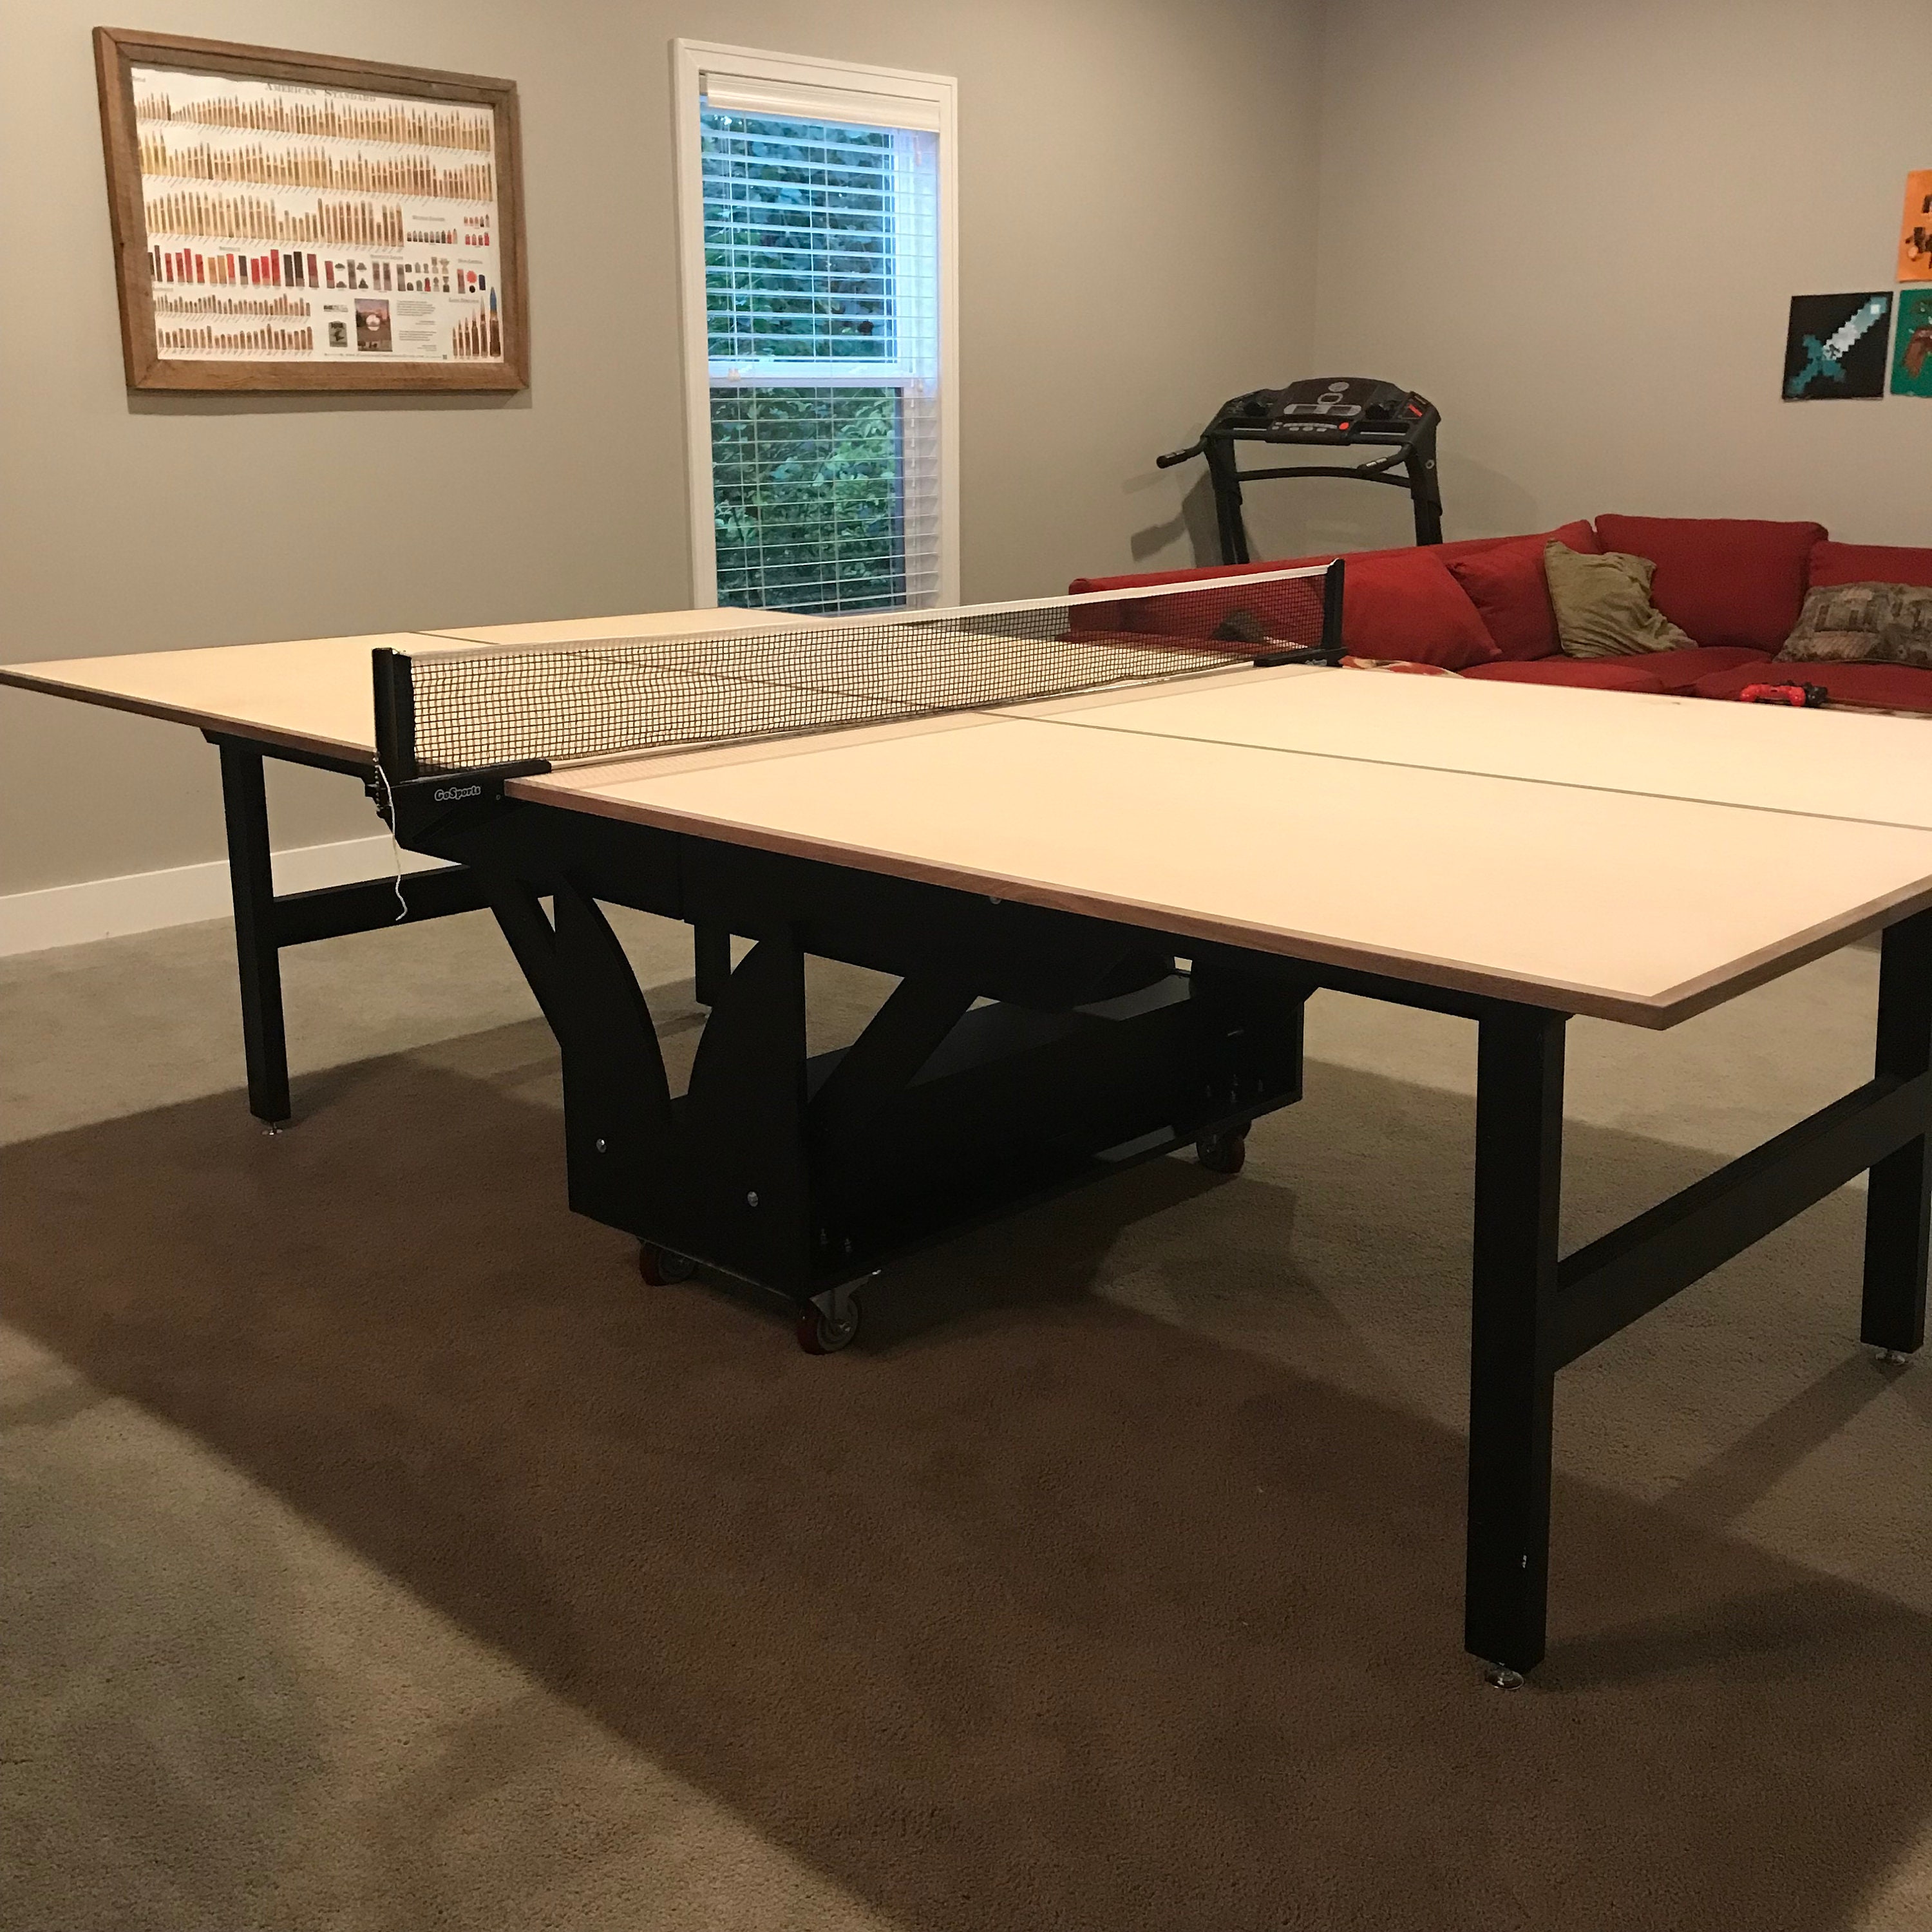 How To Set Up a Ping Pong Table